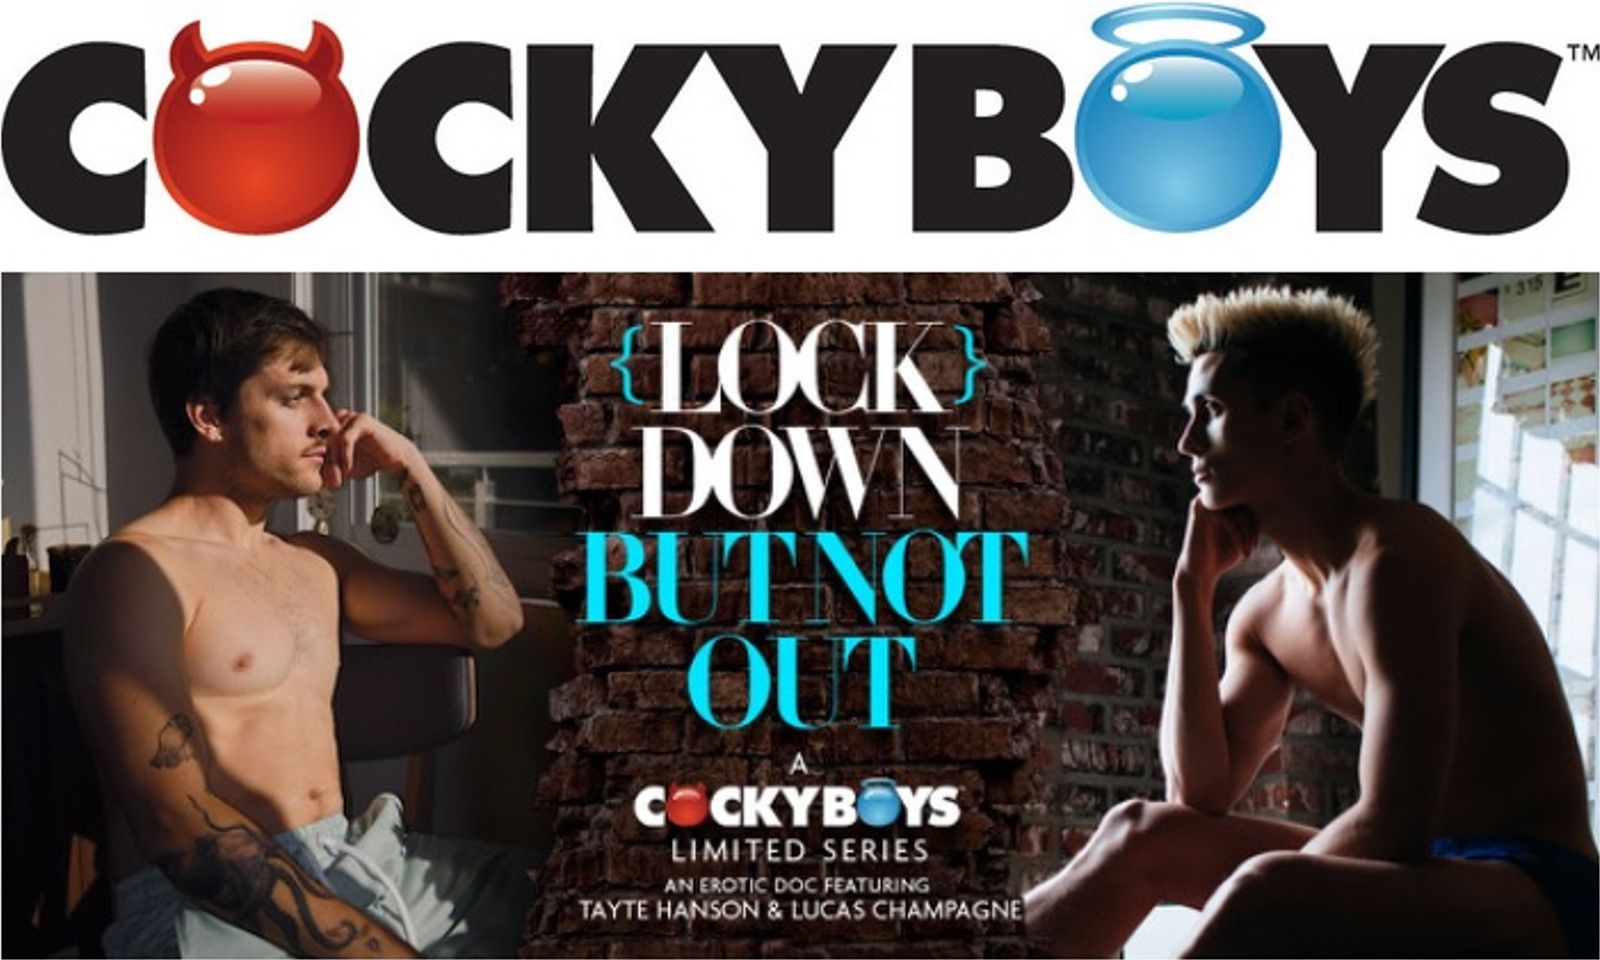 CockyBoys Debuts Erotic Documentary '(Lock) Down But Not Out'